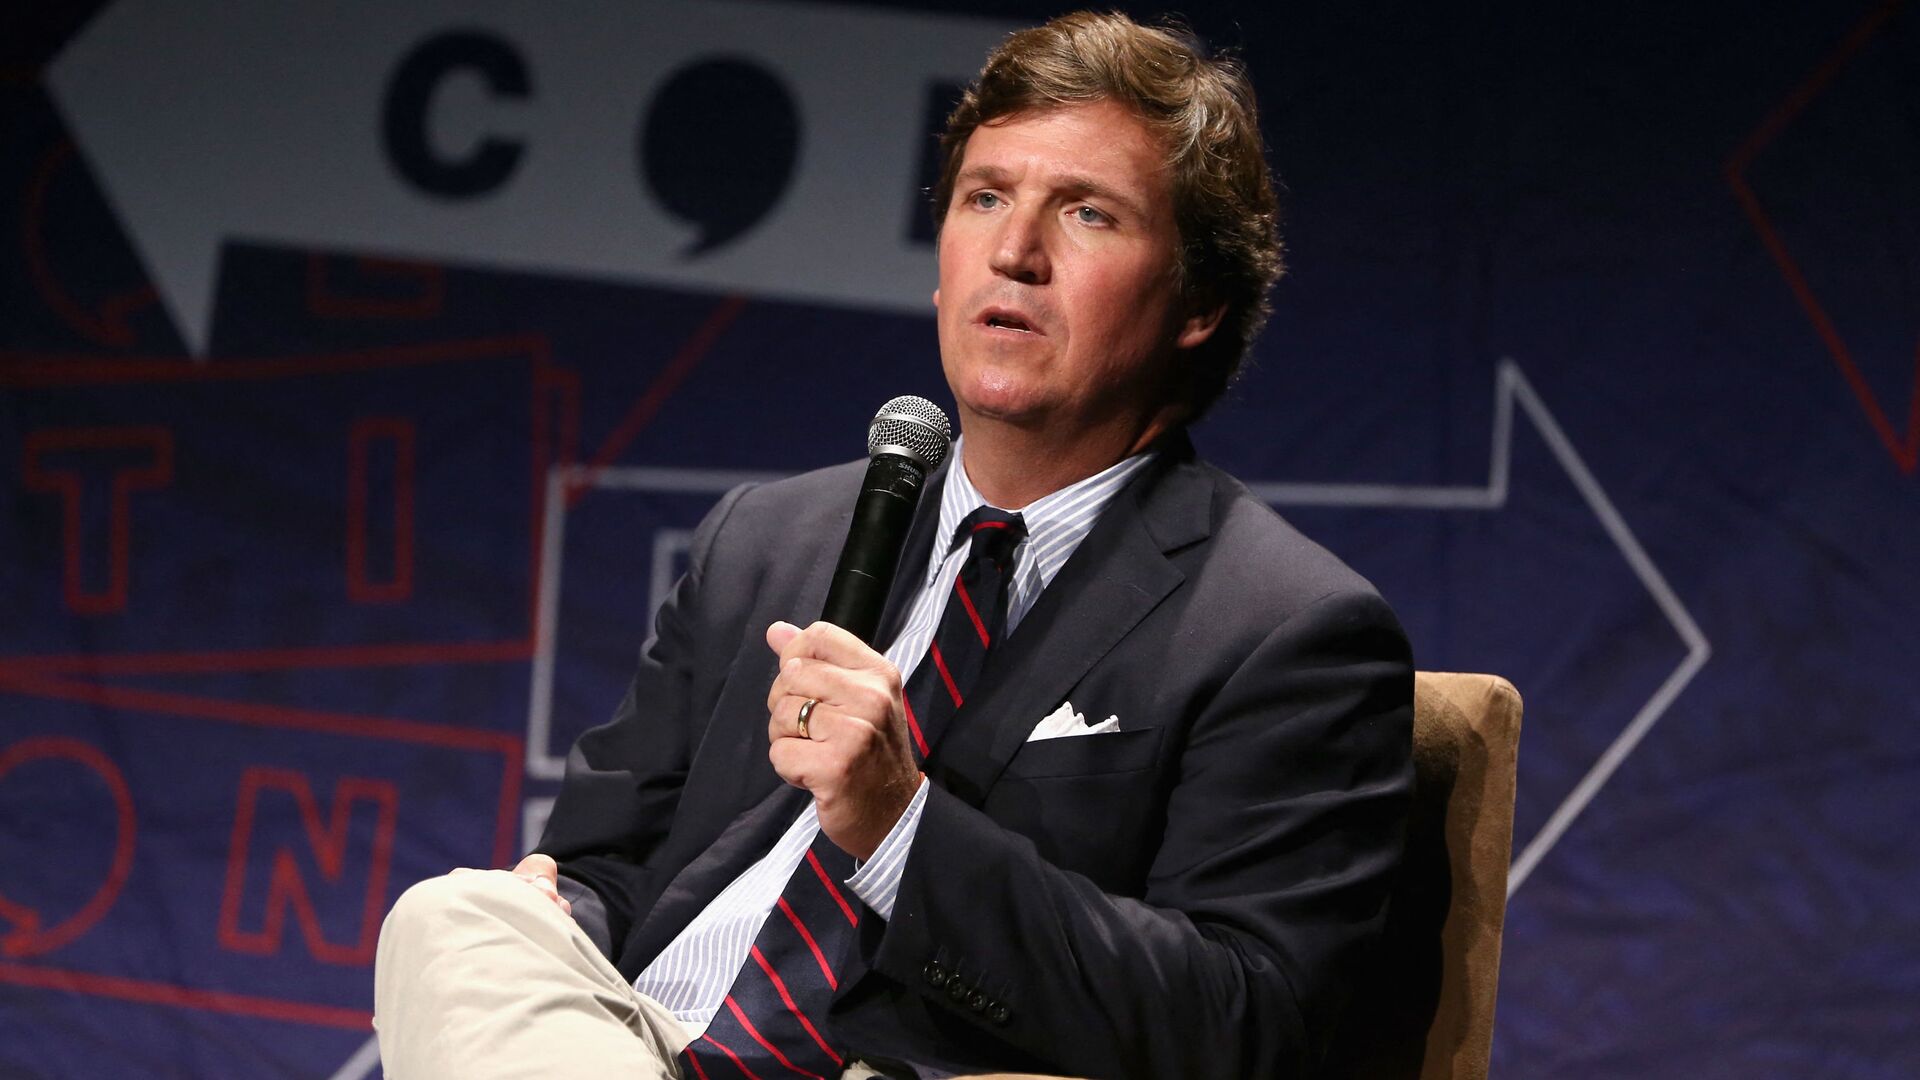 Tucker Carlson speaks onstage during Politicon 2018 at Los Angeles Convention Center on October 21, 2018 in Los Angeles, California - Sputnik International, 1920, 12.03.2022